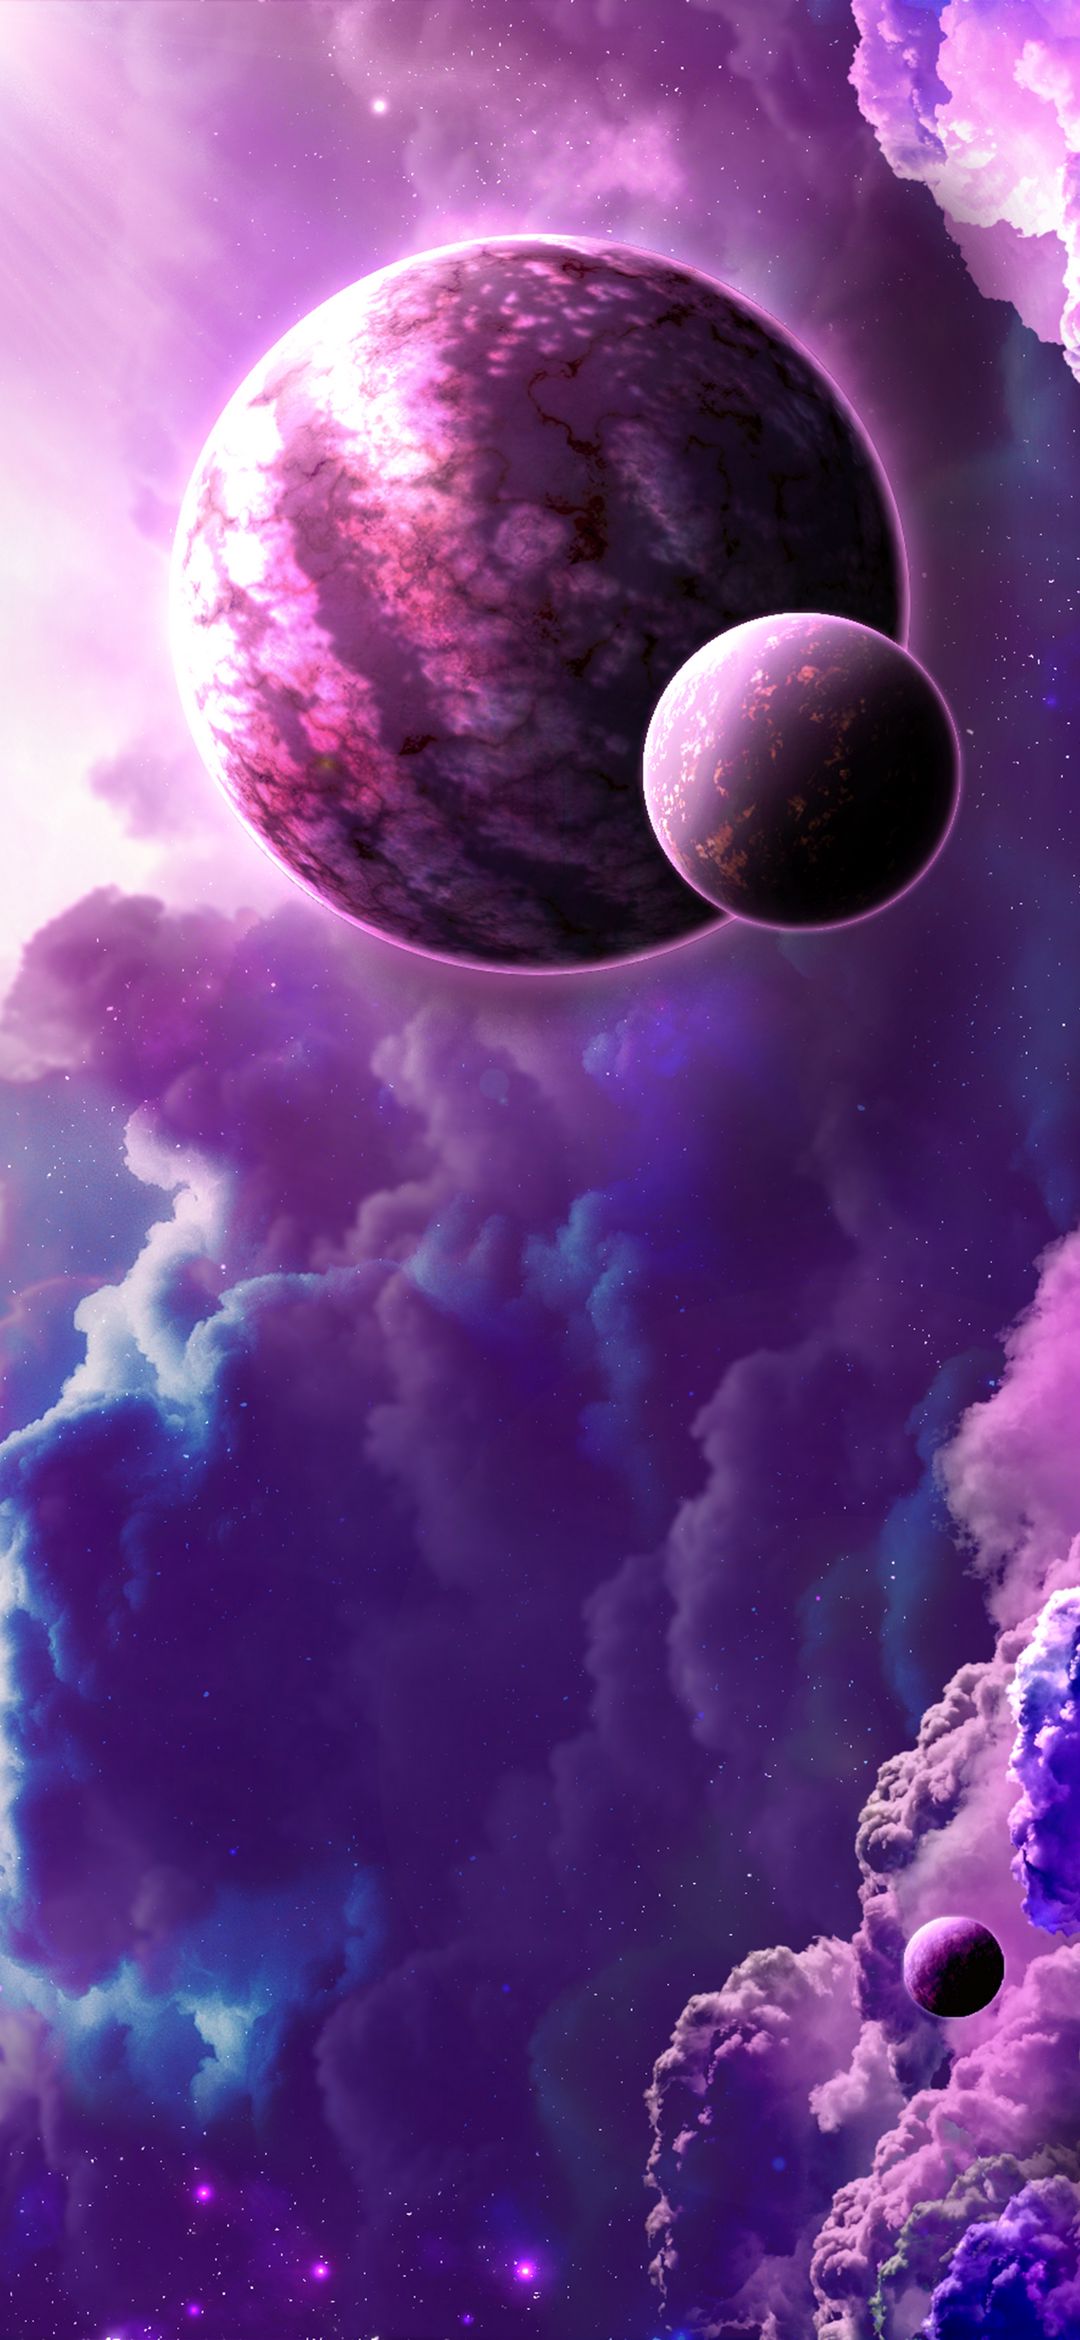 Wallpaper Clouds Plnets Aesthetic Planet Universe Star Space  Background  Download Free Image